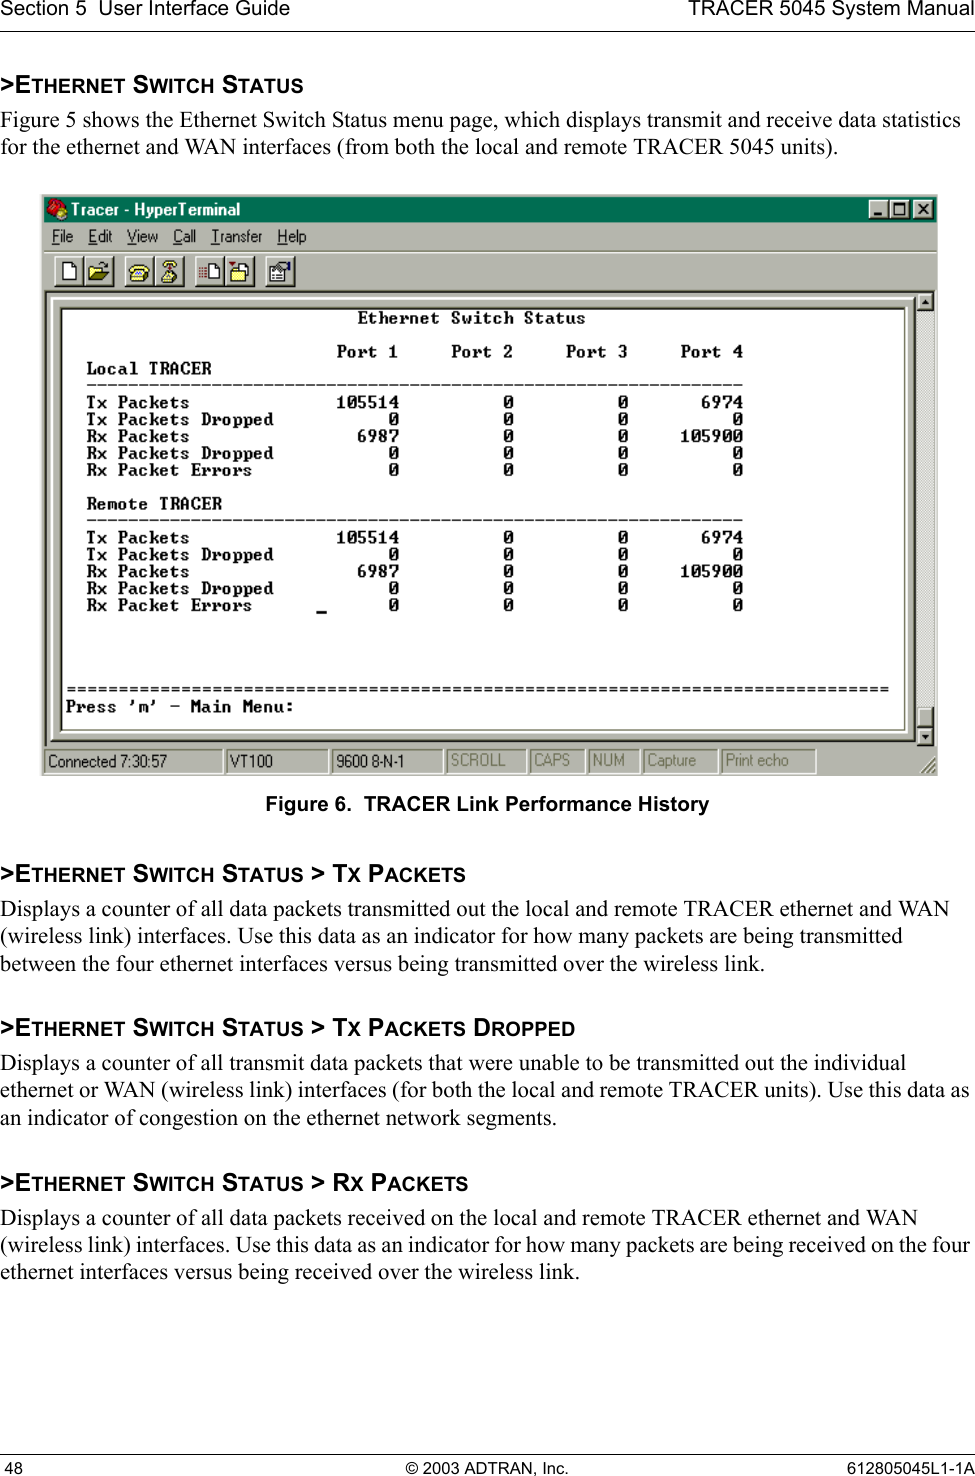 Section 5  User Interface Guide TRACER 5045 System Manual 48 © 2003 ADTRAN, Inc. 612805045L1-1A&gt;ETHERNET SWITCH STATUSFigure 5 shows the Ethernet Switch Status menu page, which displays transmit and receive data statistics for the ethernet and WAN interfaces (from both the local and remote TRACER 5045 units). Figure 6.  TRACER Link Performance History&gt;ETHERNET SWITCH STATUS &gt; TX PACKETSDisplays a counter of all data packets transmitted out the local and remote TRACER ethernet and WAN (wireless link) interfaces. Use this data as an indicator for how many packets are being transmitted between the four ethernet interfaces versus being transmitted over the wireless link.&gt;ETHERNET SWITCH STATUS &gt; TX PACKETS DROPPEDDisplays a counter of all transmit data packets that were unable to be transmitted out the individual ethernet or WAN (wireless link) interfaces (for both the local and remote TRACER units). Use this data as an indicator of congestion on the ethernet network segments.&gt;ETHERNET SWITCH STATUS &gt; RX PACKETSDisplays a counter of all data packets received on the local and remote TRACER ethernet and WAN (wireless link) interfaces. Use this data as an indicator for how many packets are being received on the four ethernet interfaces versus being received over the wireless link.